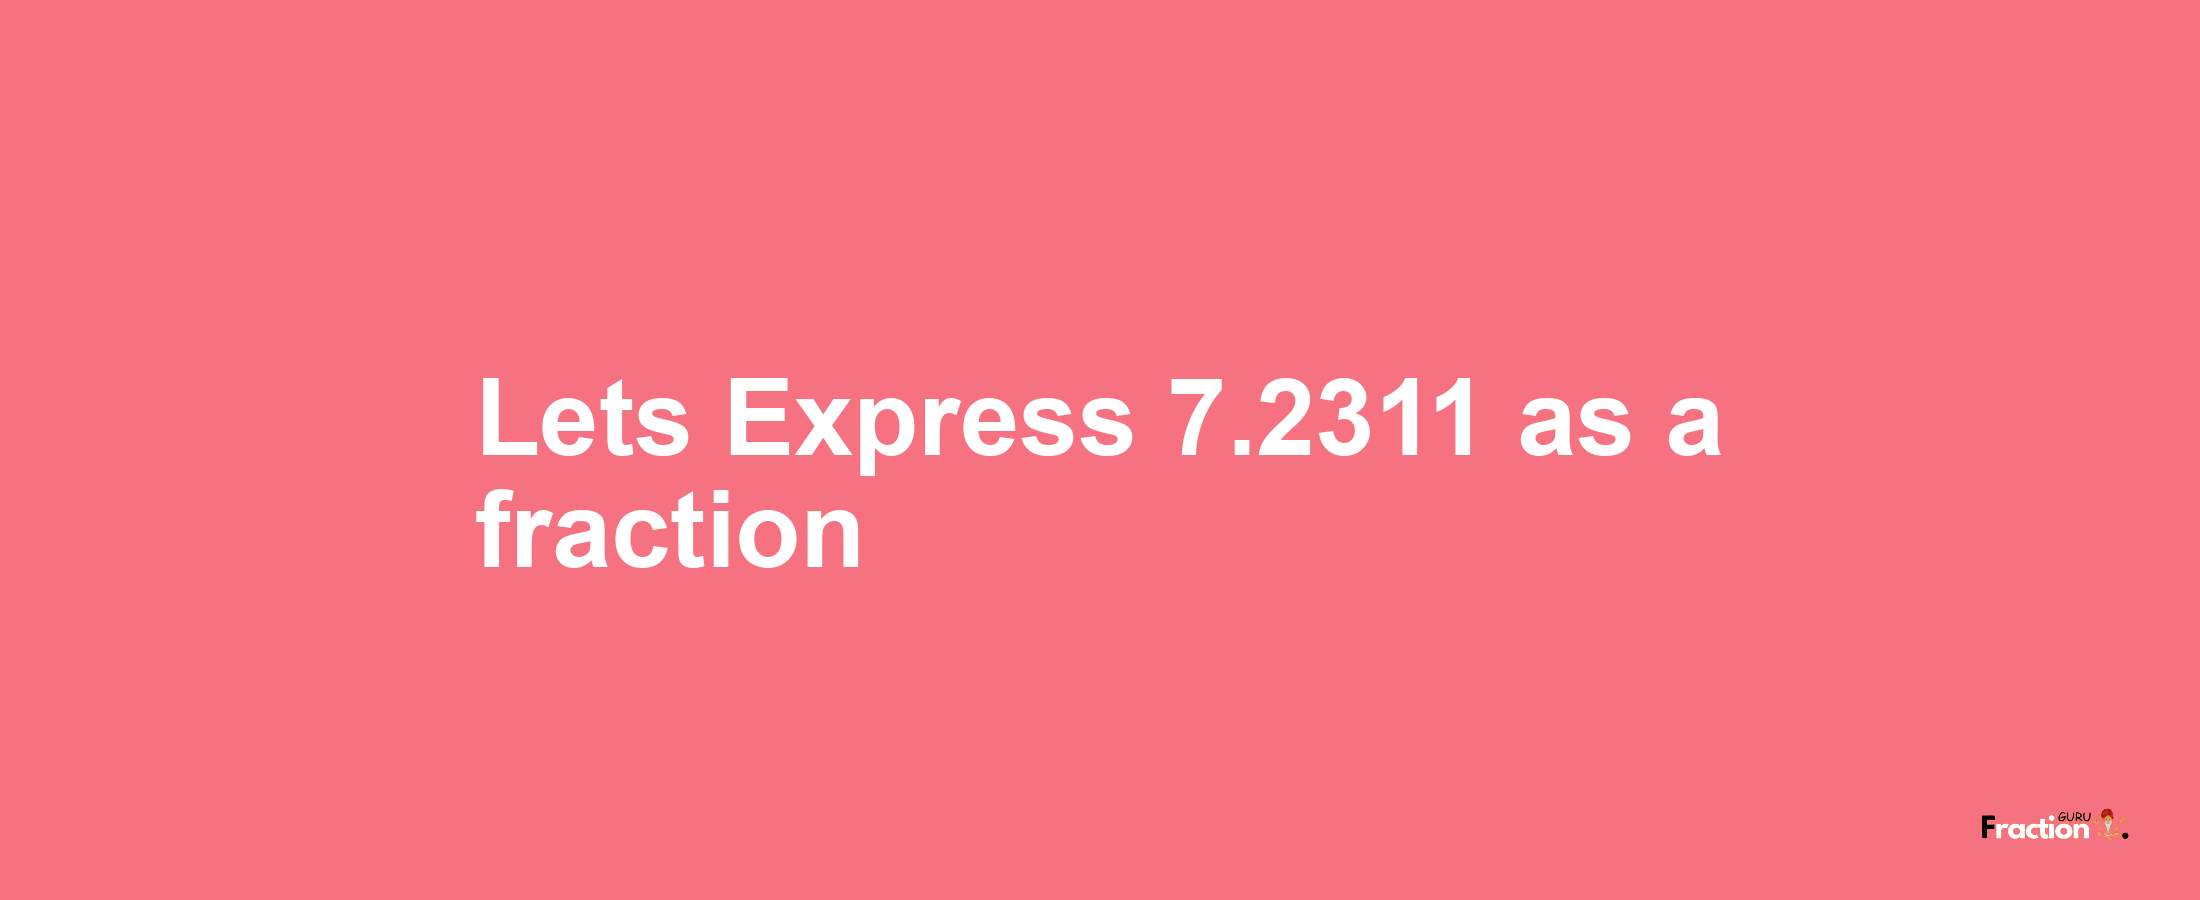 Lets Express 7.2311 as afraction